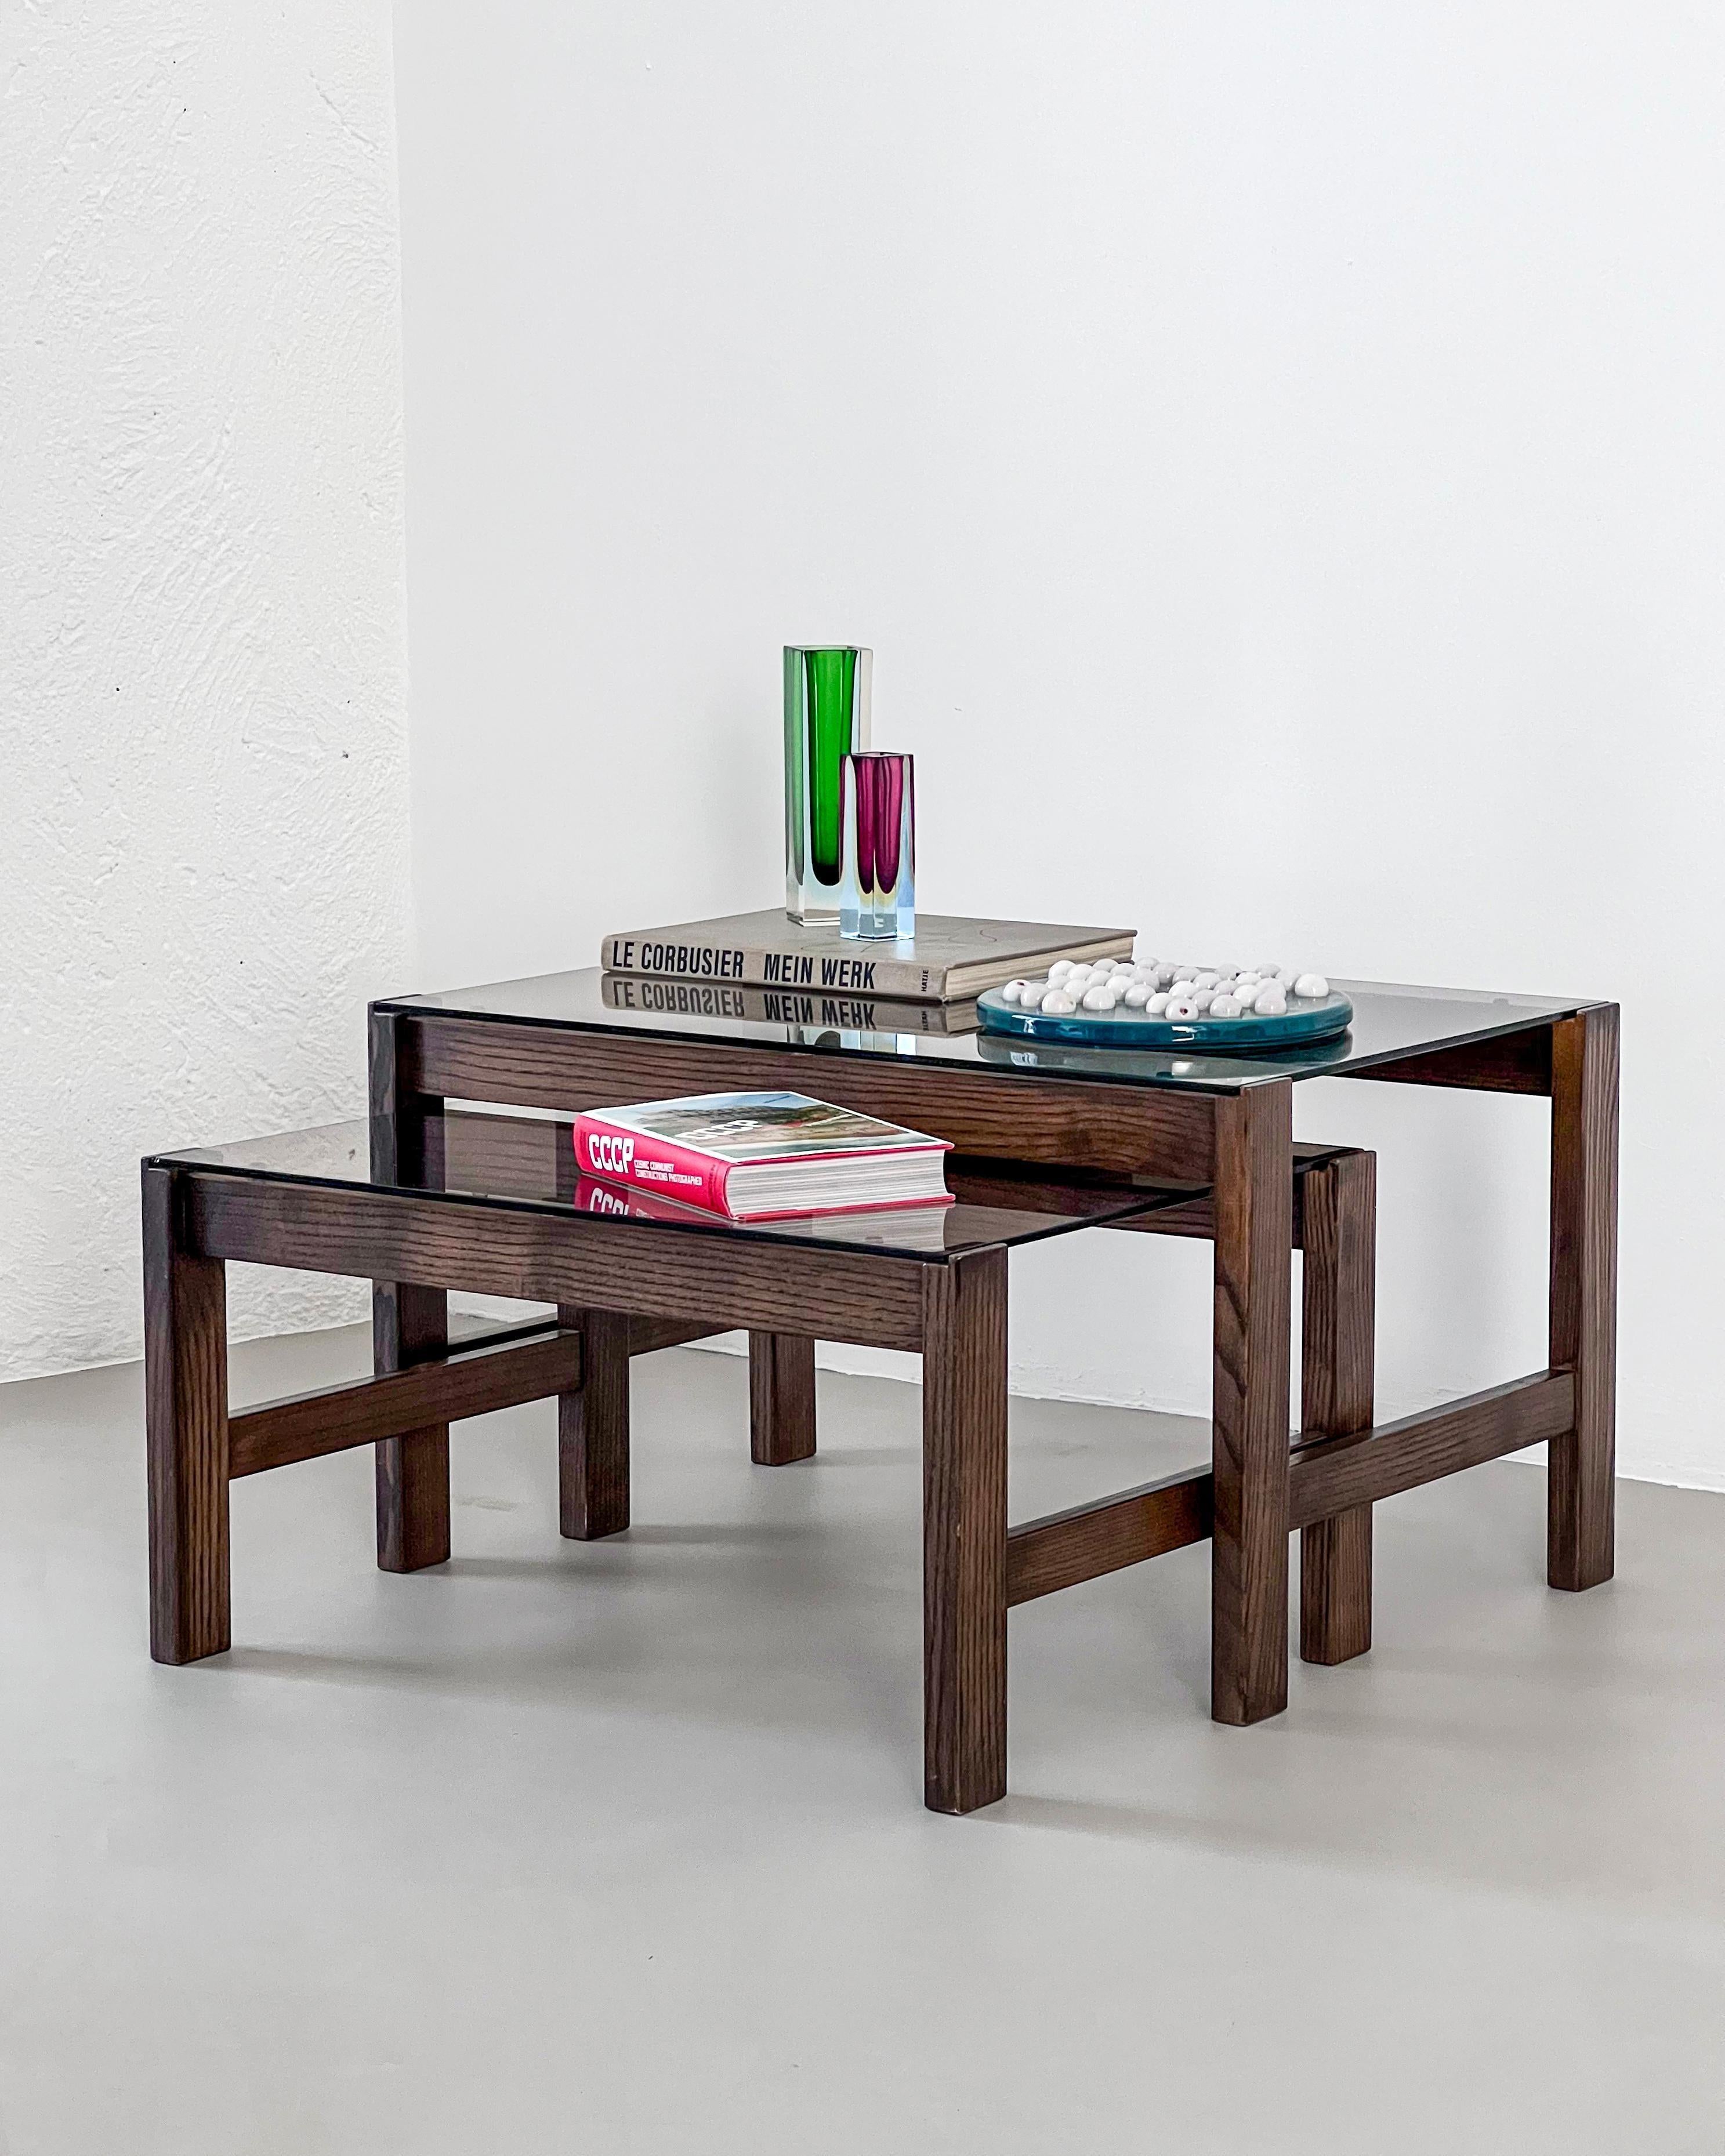 Offered for sale is a beautiful set of two nesting coffee tables, crafted from solid wood (most likely walnut) with lightly smoked glass tops. The design, essential yet refined, reminds pieces created during the sixties by Gianfranco Frattini and